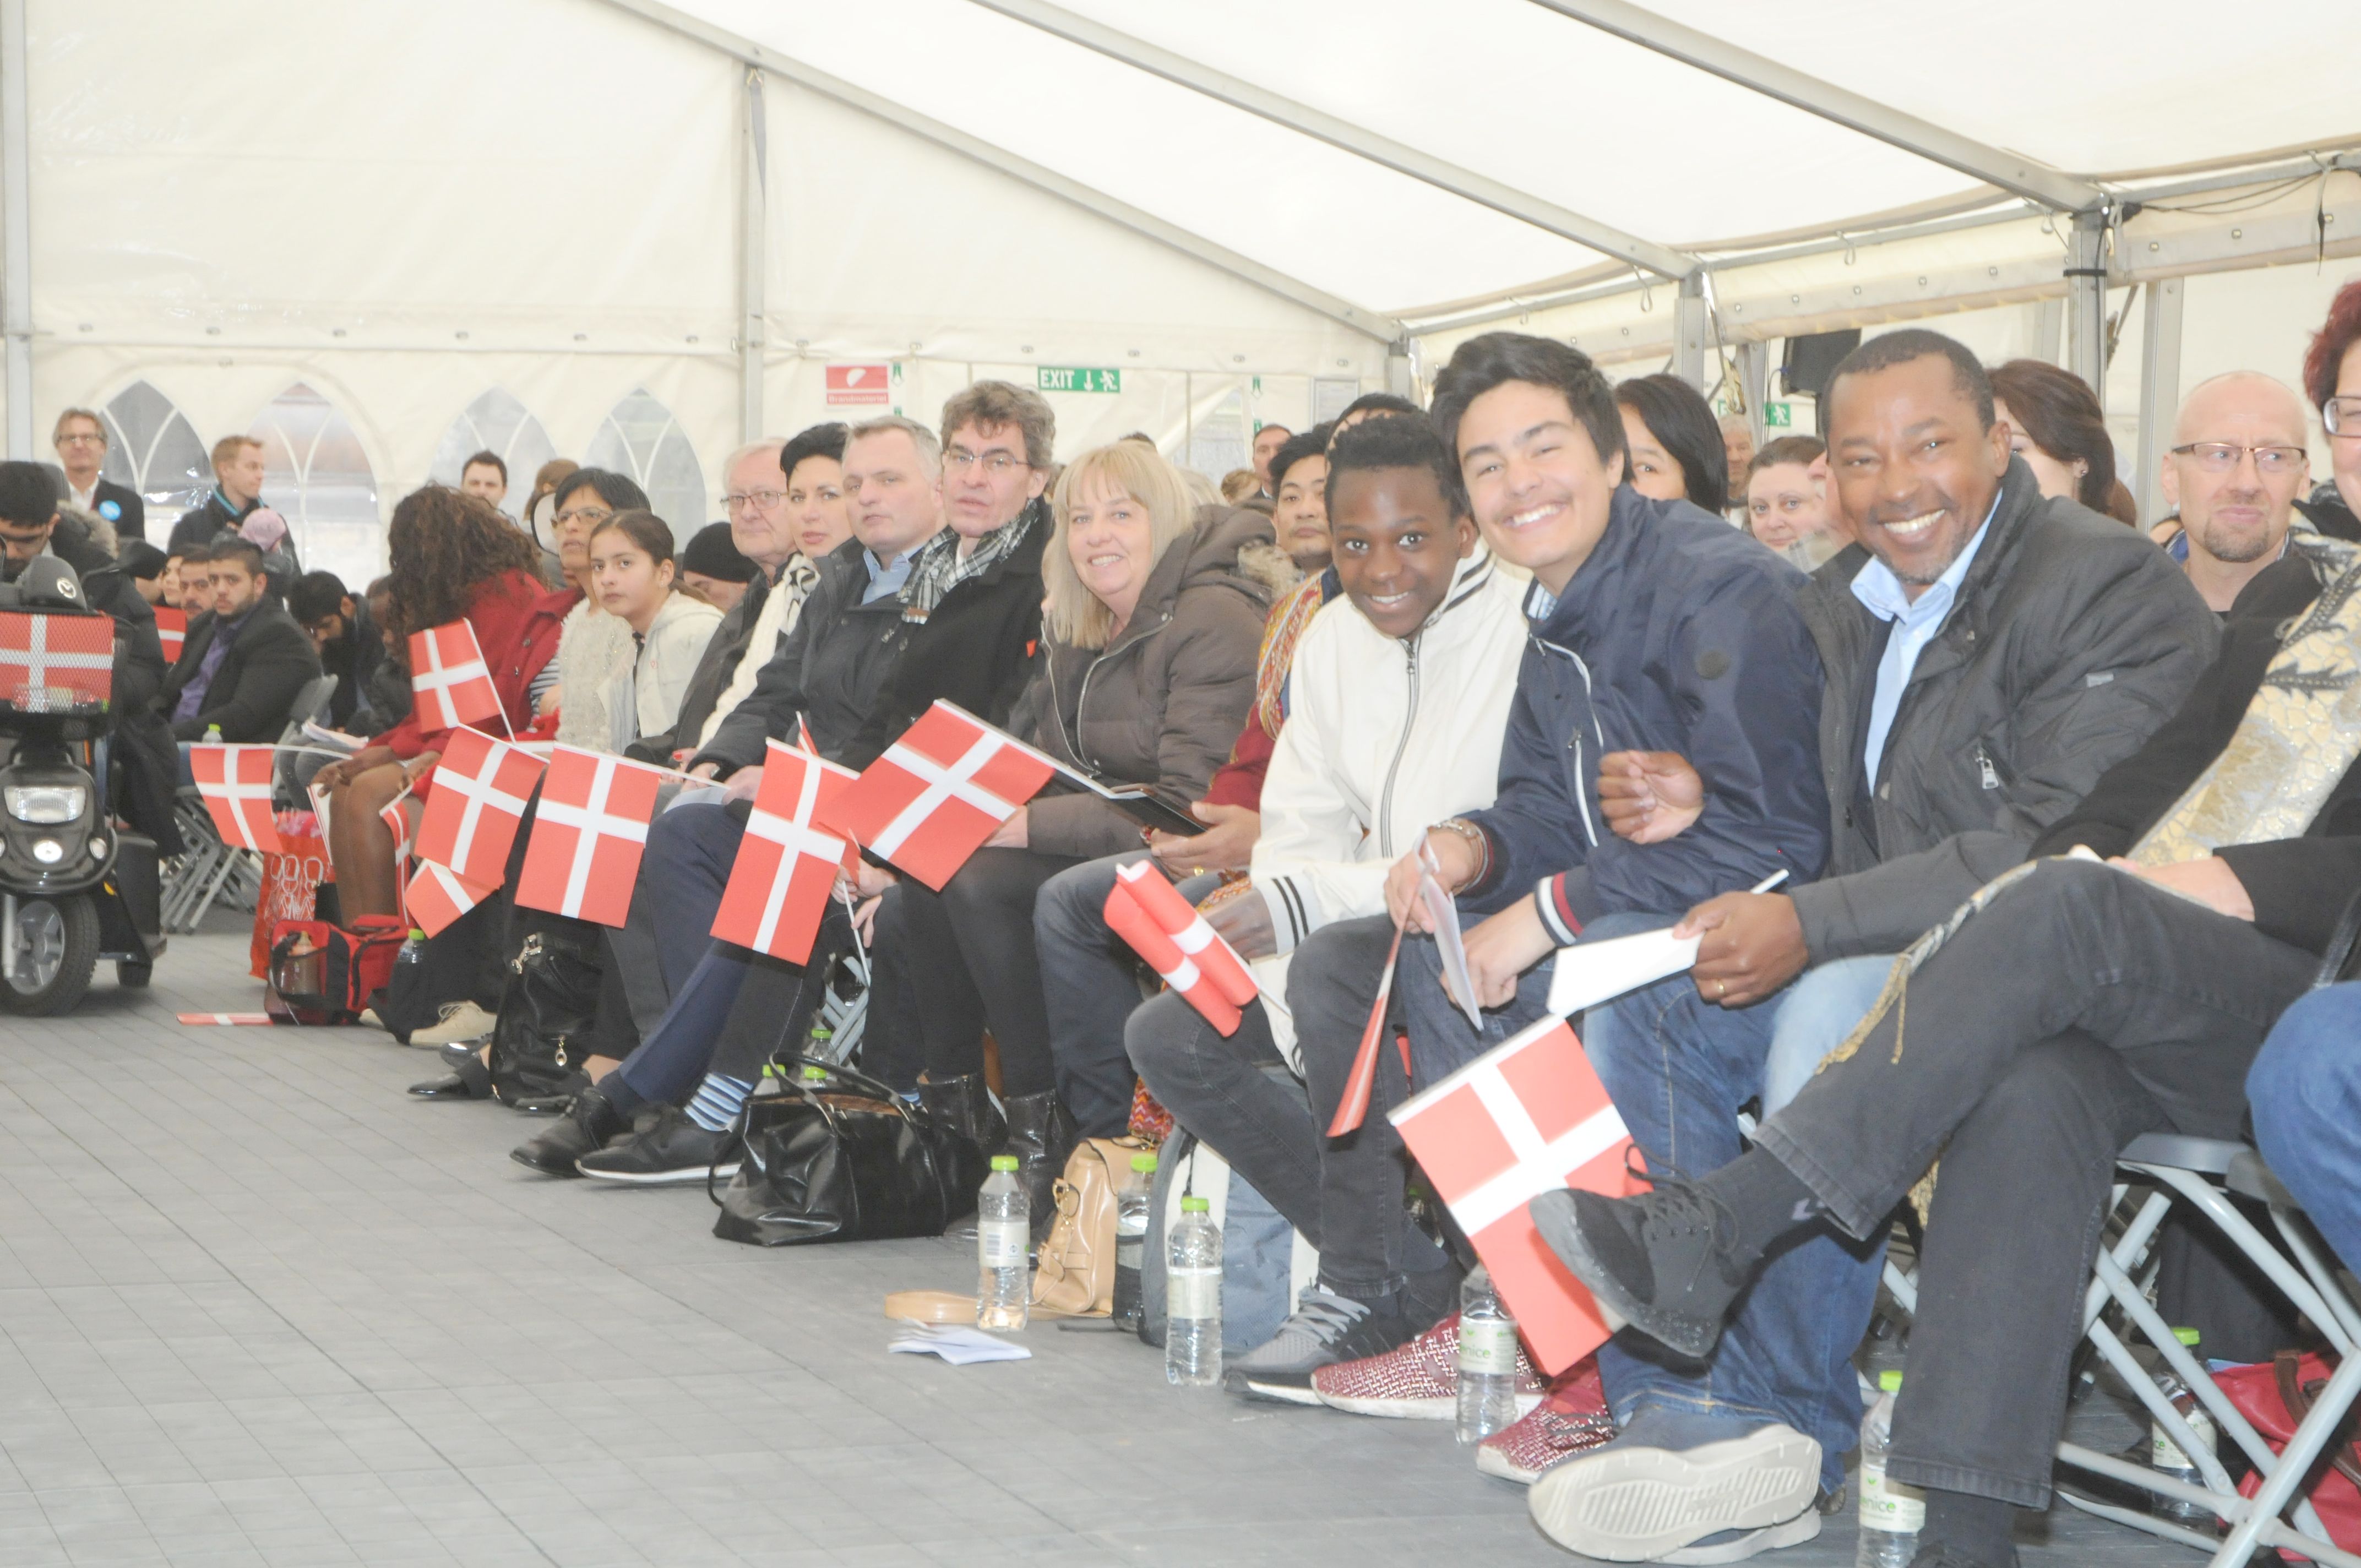 Making Danish citizenship easier to achieve accelerates integration – study